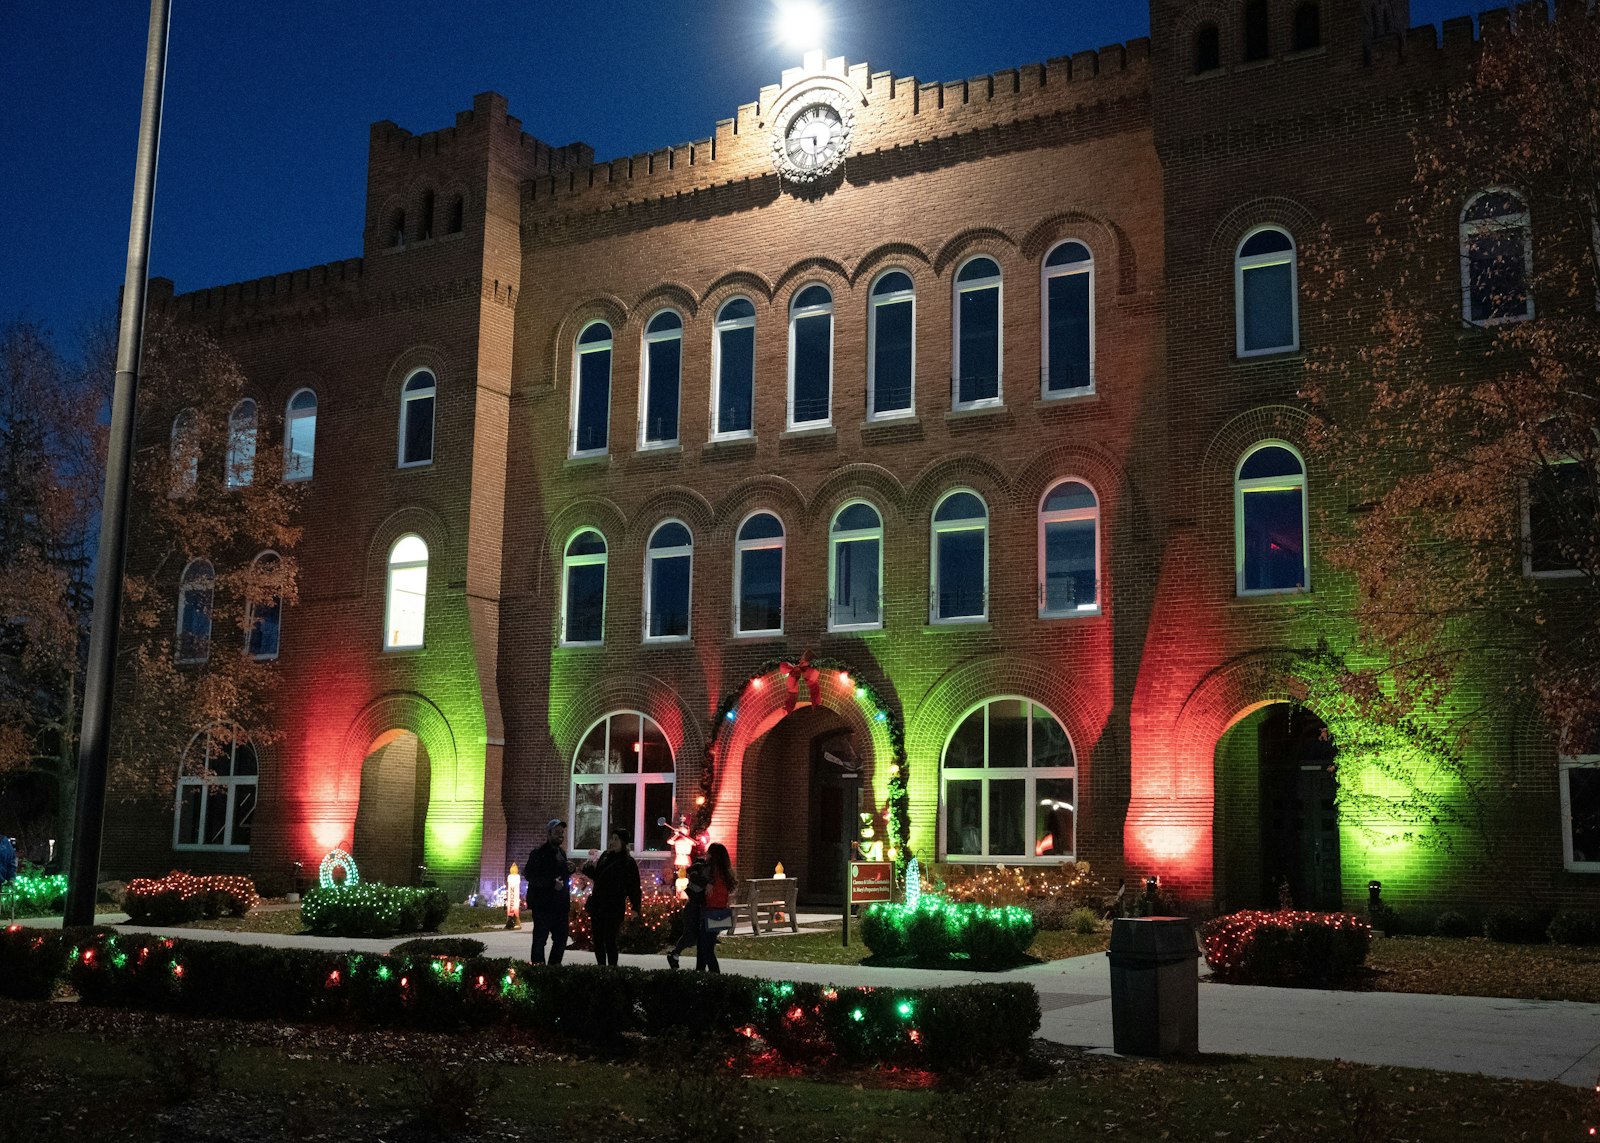 Over the last several years, the lights have become part of a larger celebration that brings current and former students together. (Gabriella Patti | Detroit Catholic)